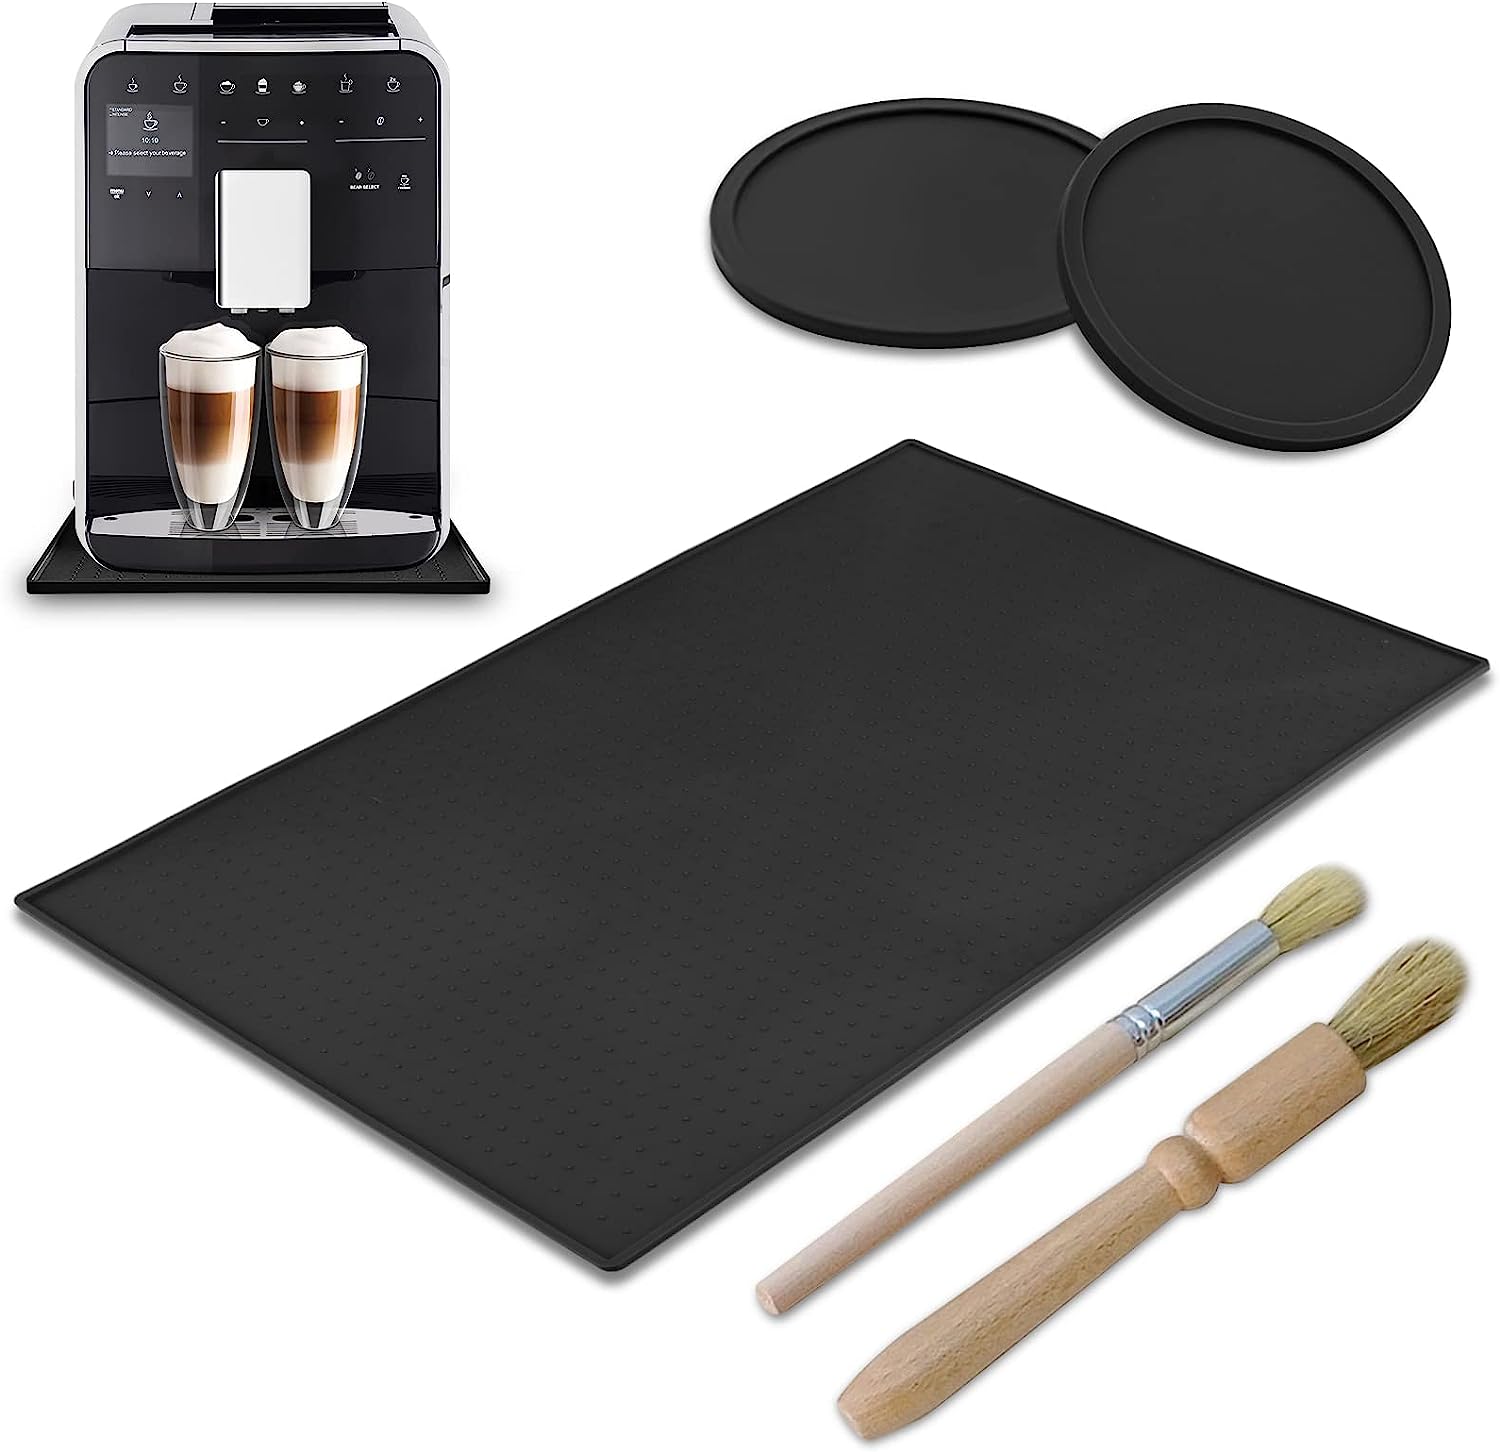 Underlay for coffee machine - 48 x 30 cm black mat for coffee machine non -slip underlay, fully automatic coffee machine silicone mat with 2 x silicone coasters and 2 x Brushes - to protect table top